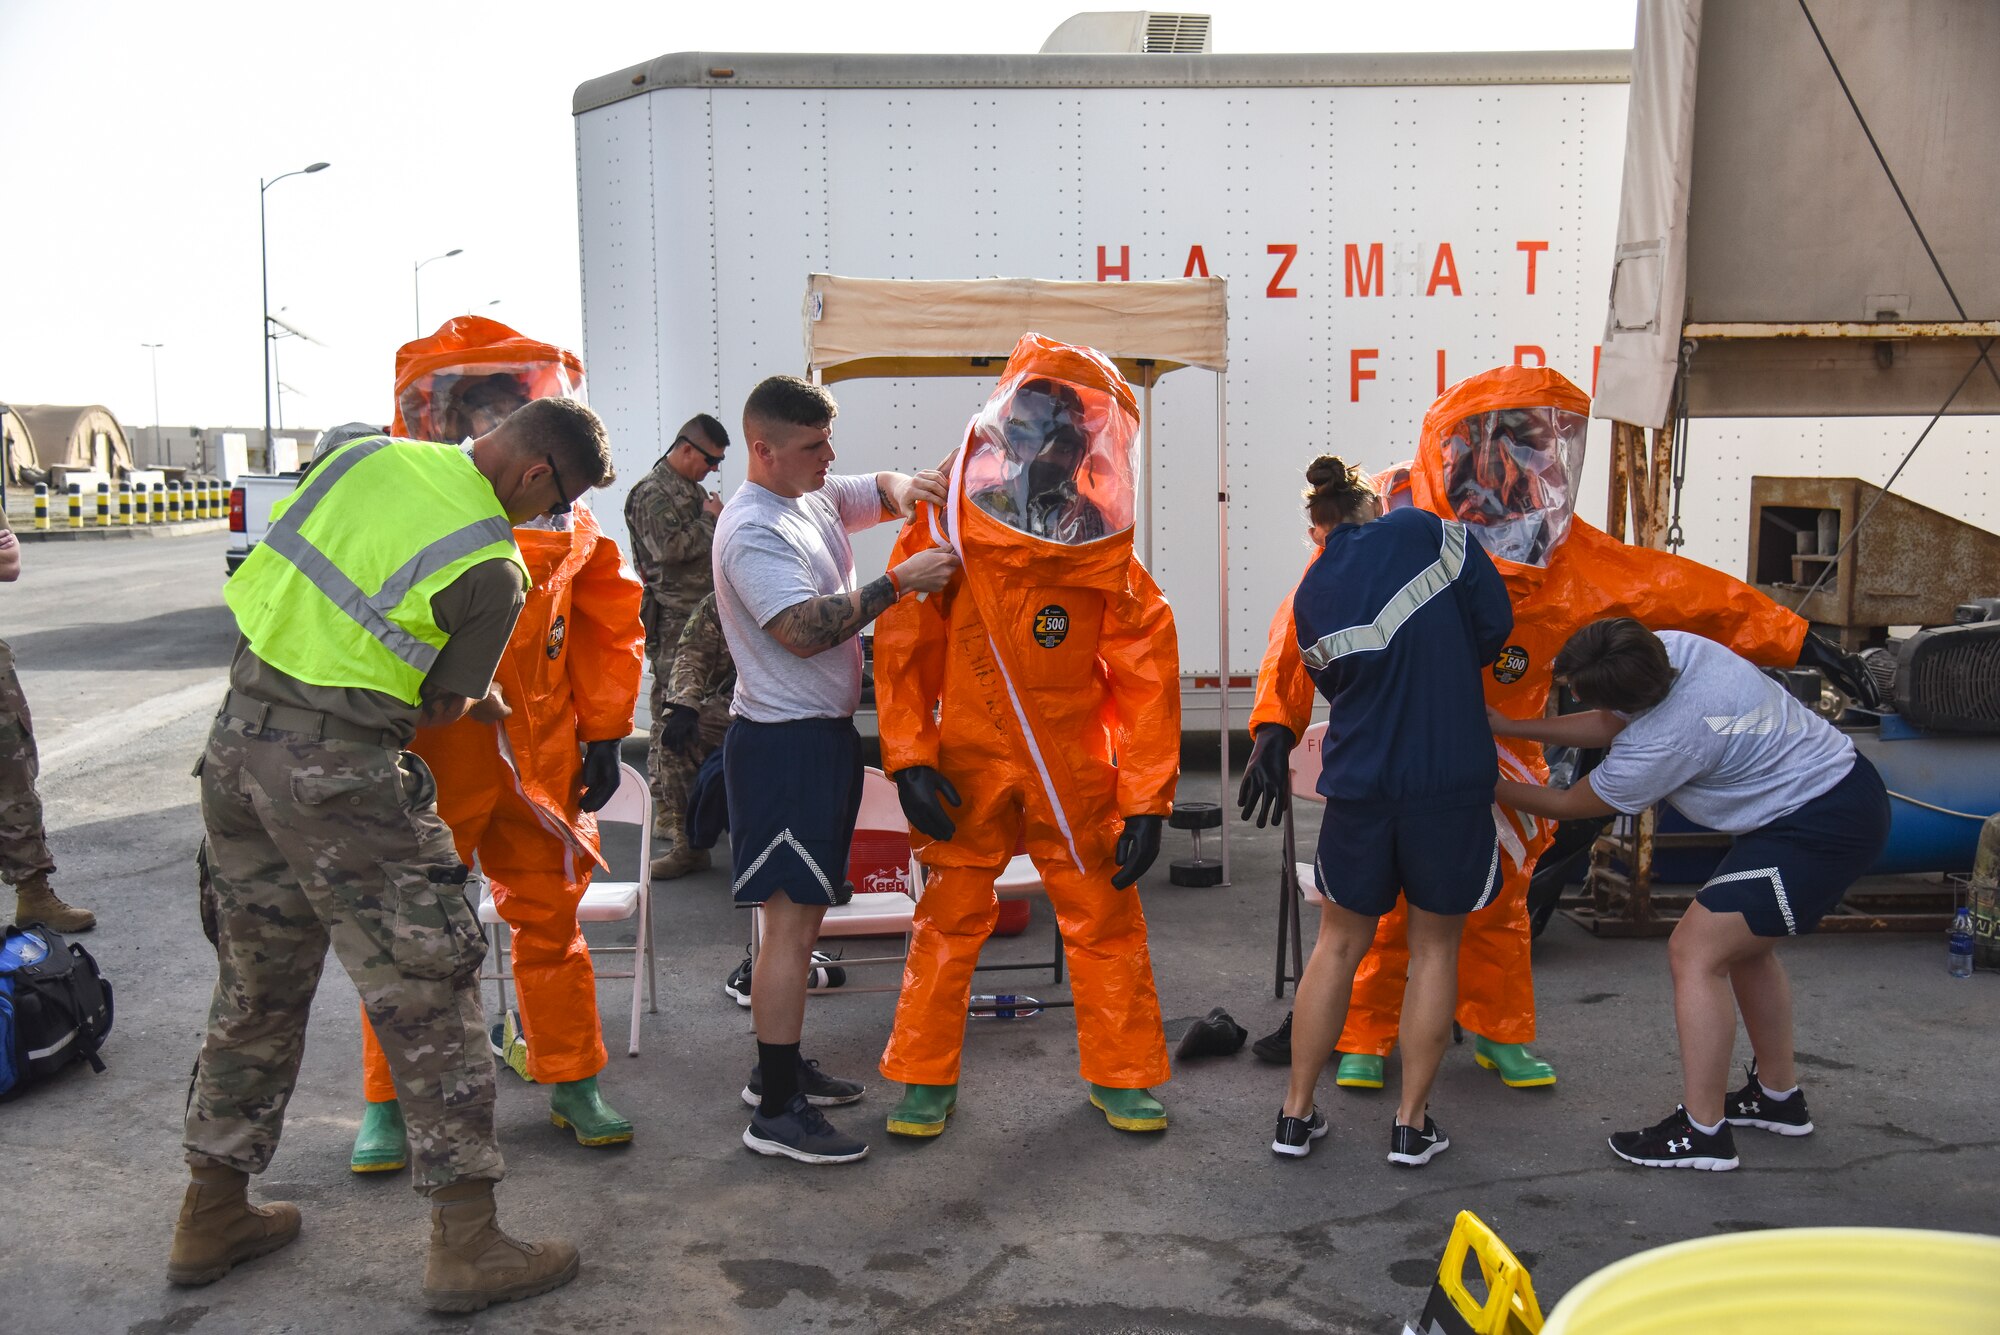 U.S. Airmen assigned to the 380th Expeditionary Civil Engineer Squadron don Level-A suits during a hazardous materials exercise at Al Dhafra Air Base, United Arab Emirates, Jan. 4, 2019. The 380th ECES Fire Department and Emergency Management flights conducted a joint-agency hazardous material exercise for training purposes. (U.S. Air Force photo by Senior Airman Mya M. Crosby)